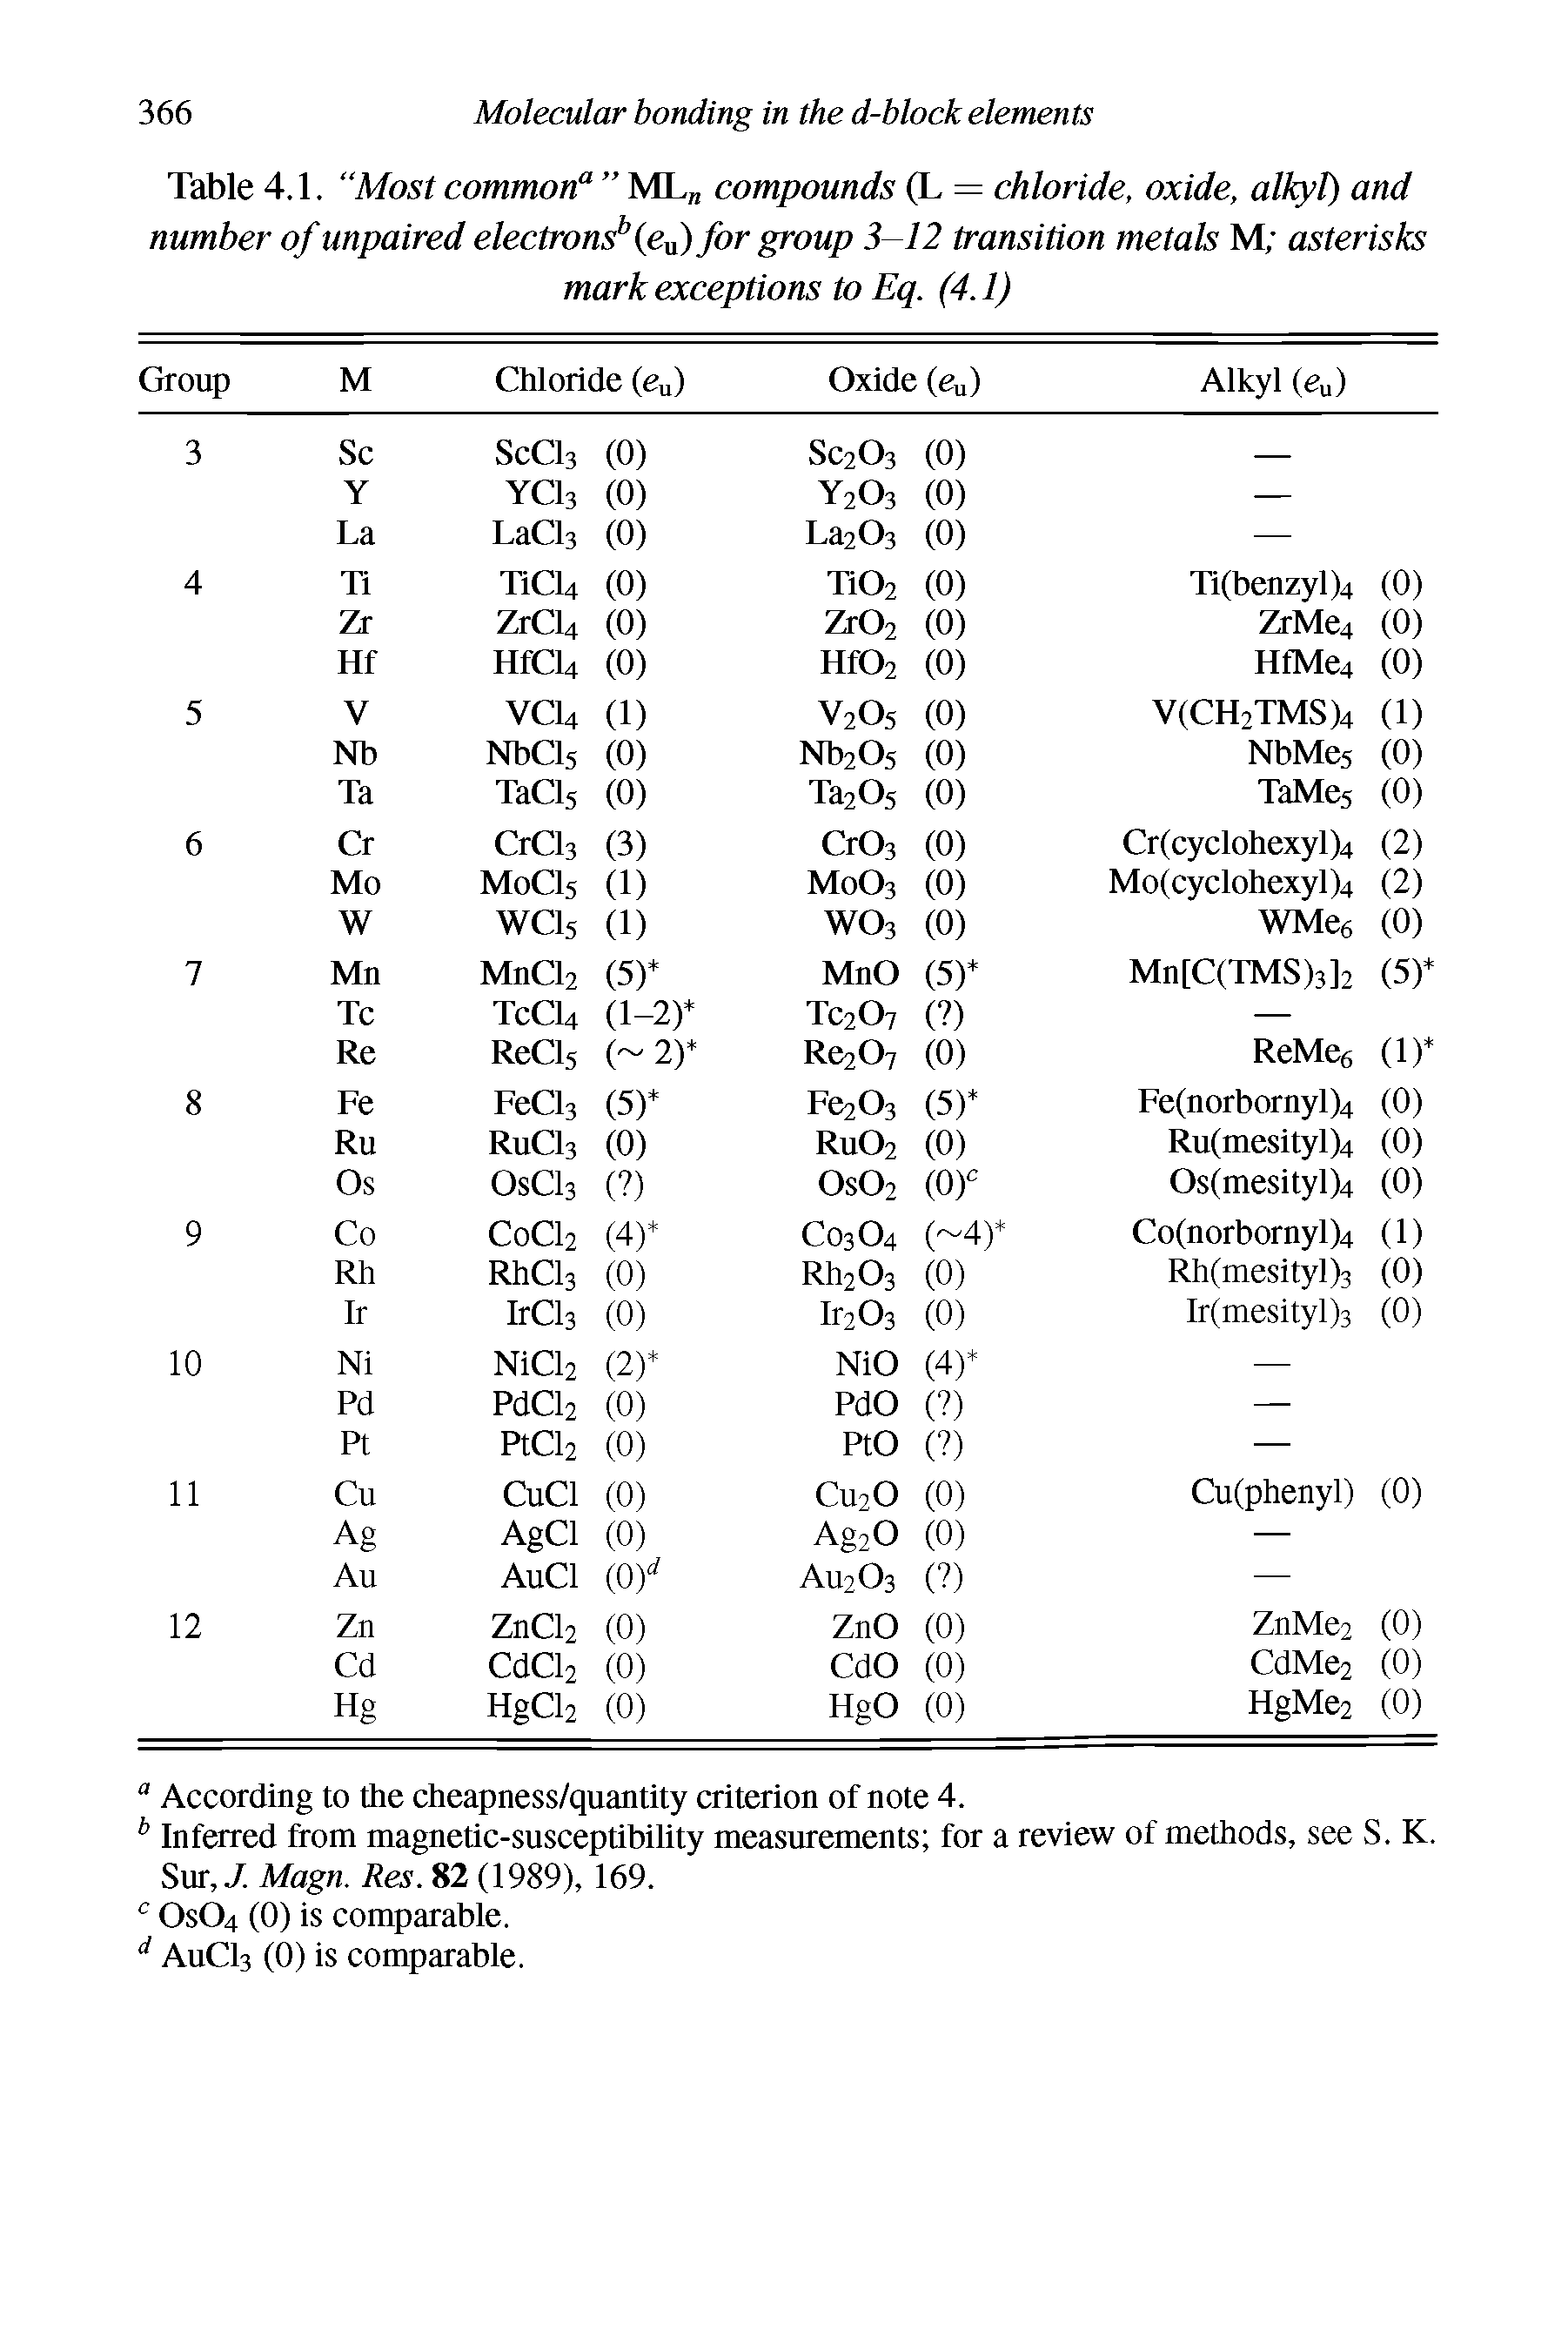 Table 4.1. Most commona ML compounds (L = chloride, oxide, alkyl) and number of unpaired electrons1 (eu) for group 3-12 transition metals M asterisks...